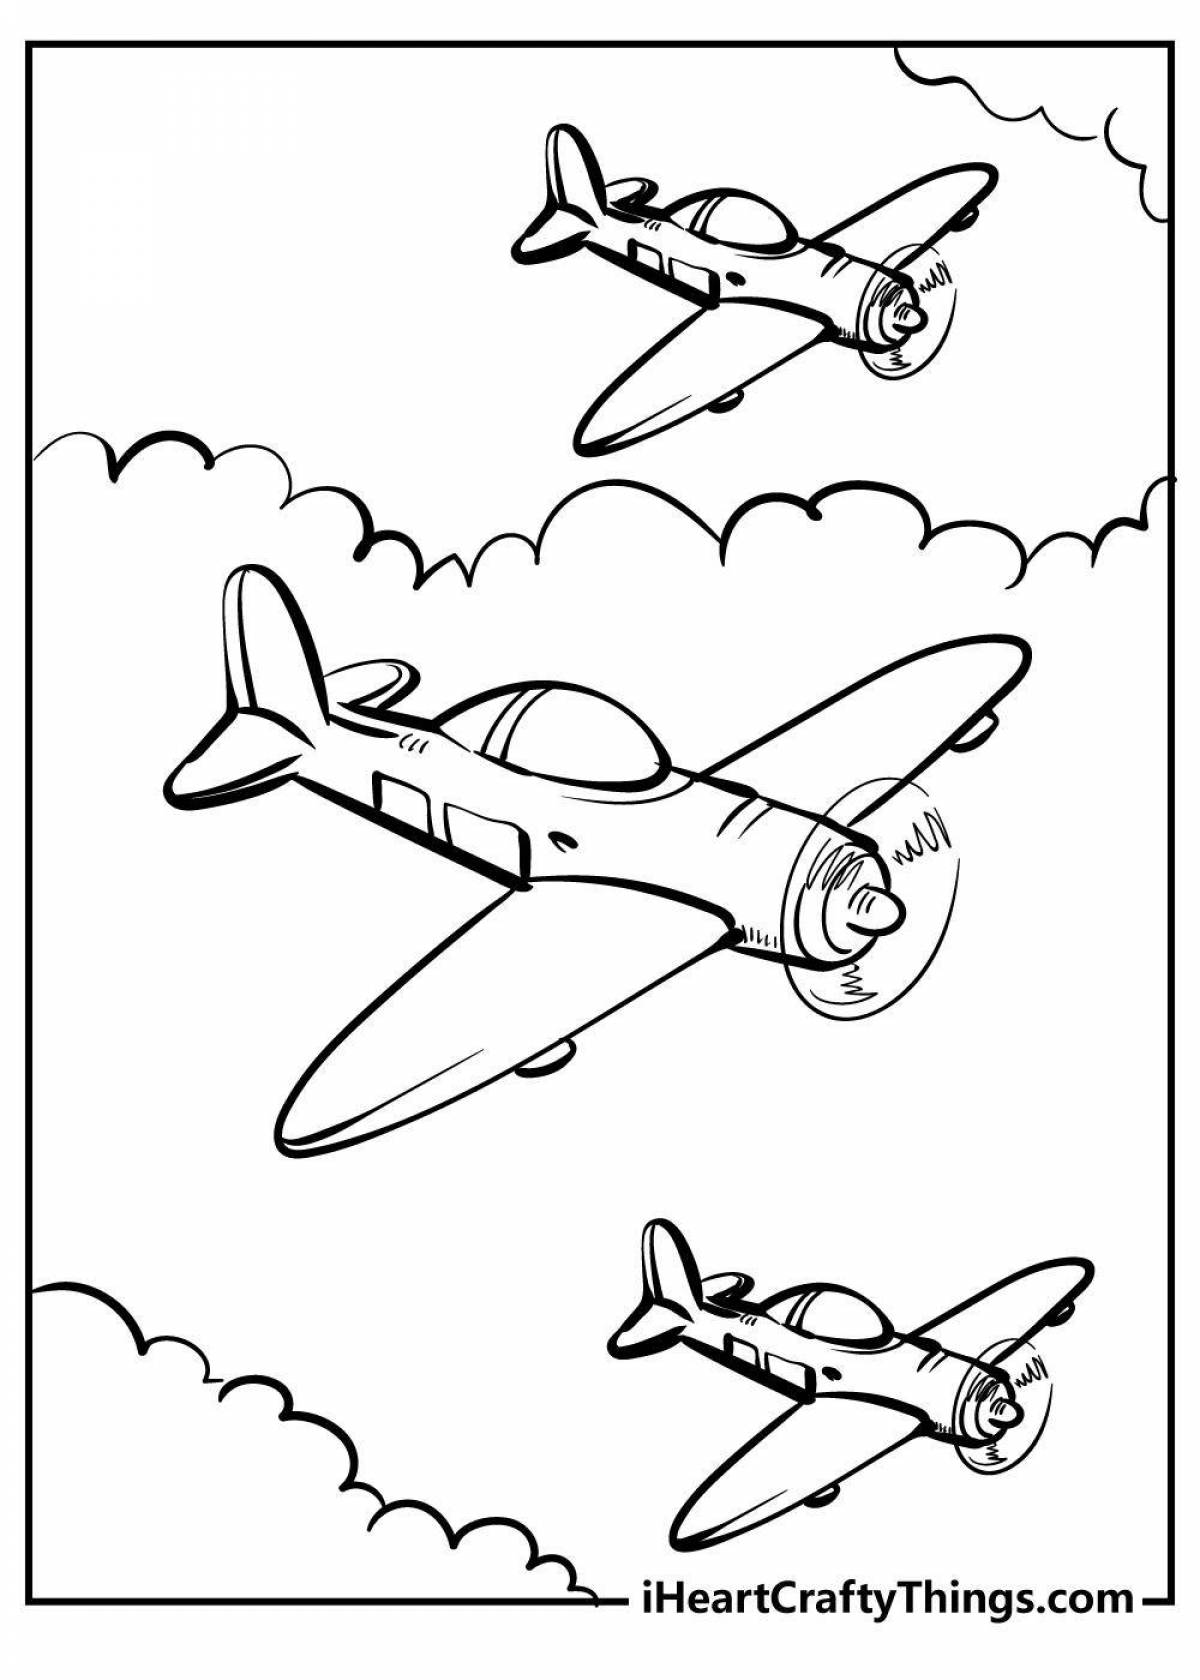 Glorious military aircraft coloring book for children 5-6 years old